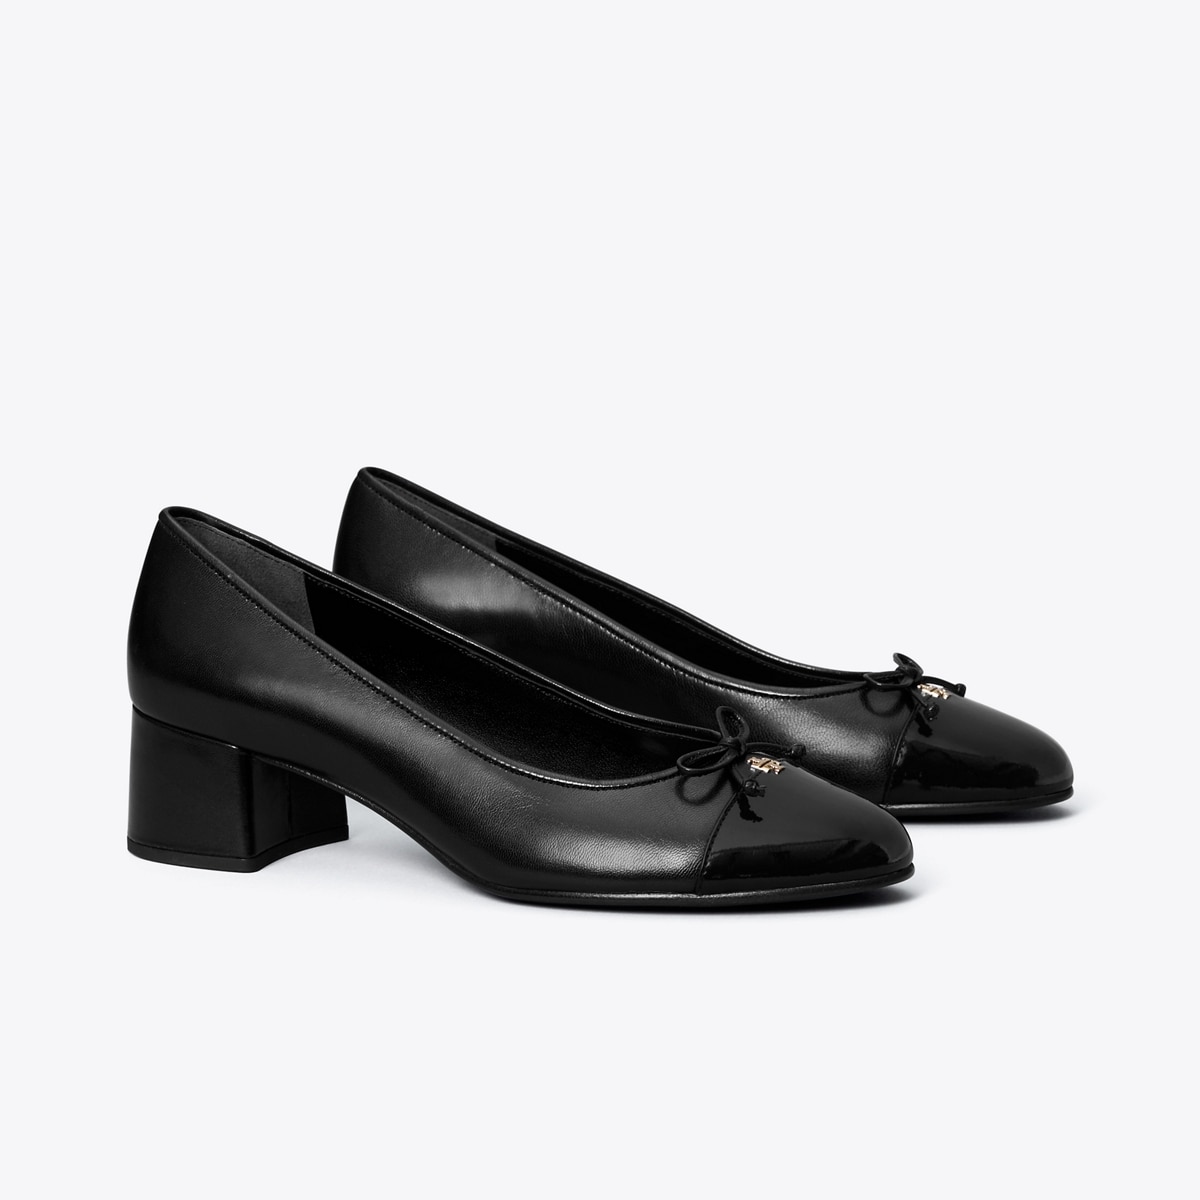 Tory Burch Women's Bow Leather Pumps - Black - 7.5